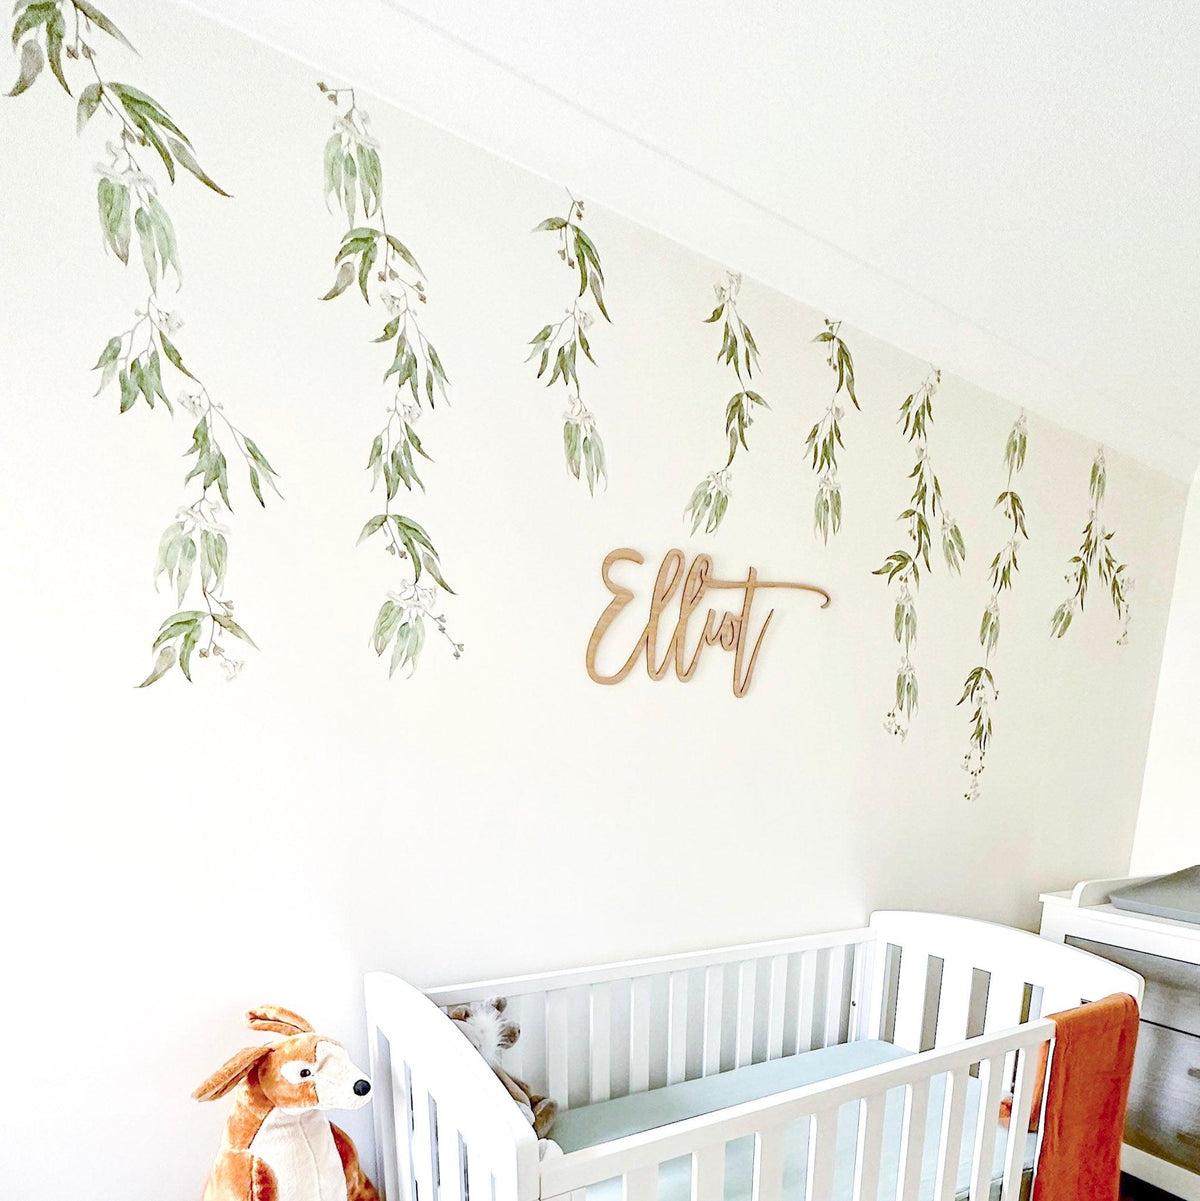 Gum Leaf Branches For an Australiana-themed Nursery - Wall Stickers - lovefrankieart